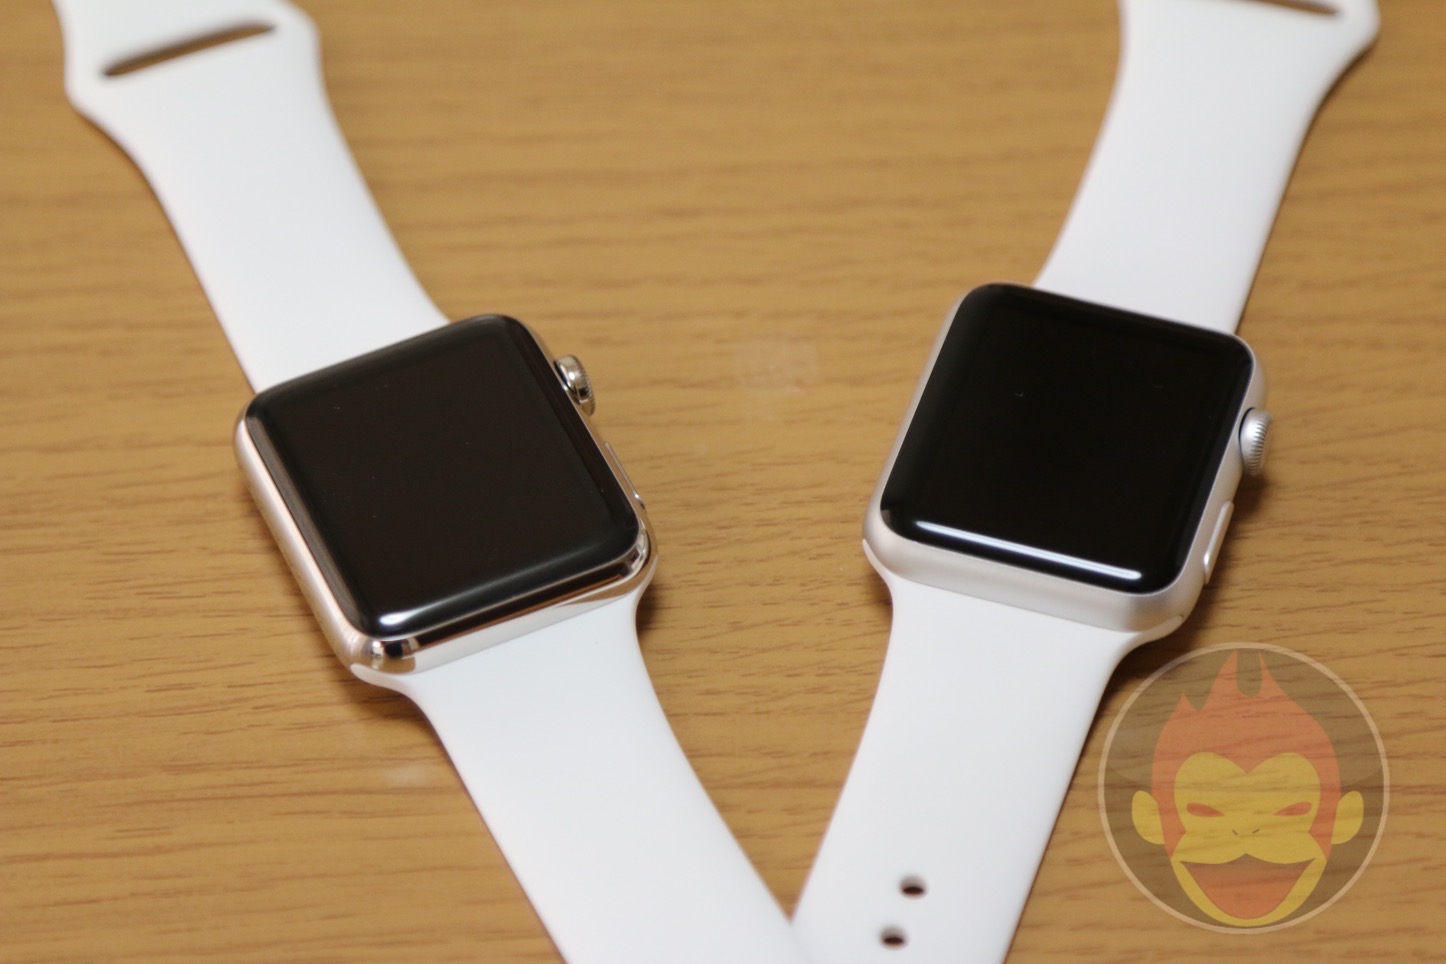 Apple-Watch-Stainless-Steel-White-Band-42mm-034.JPG